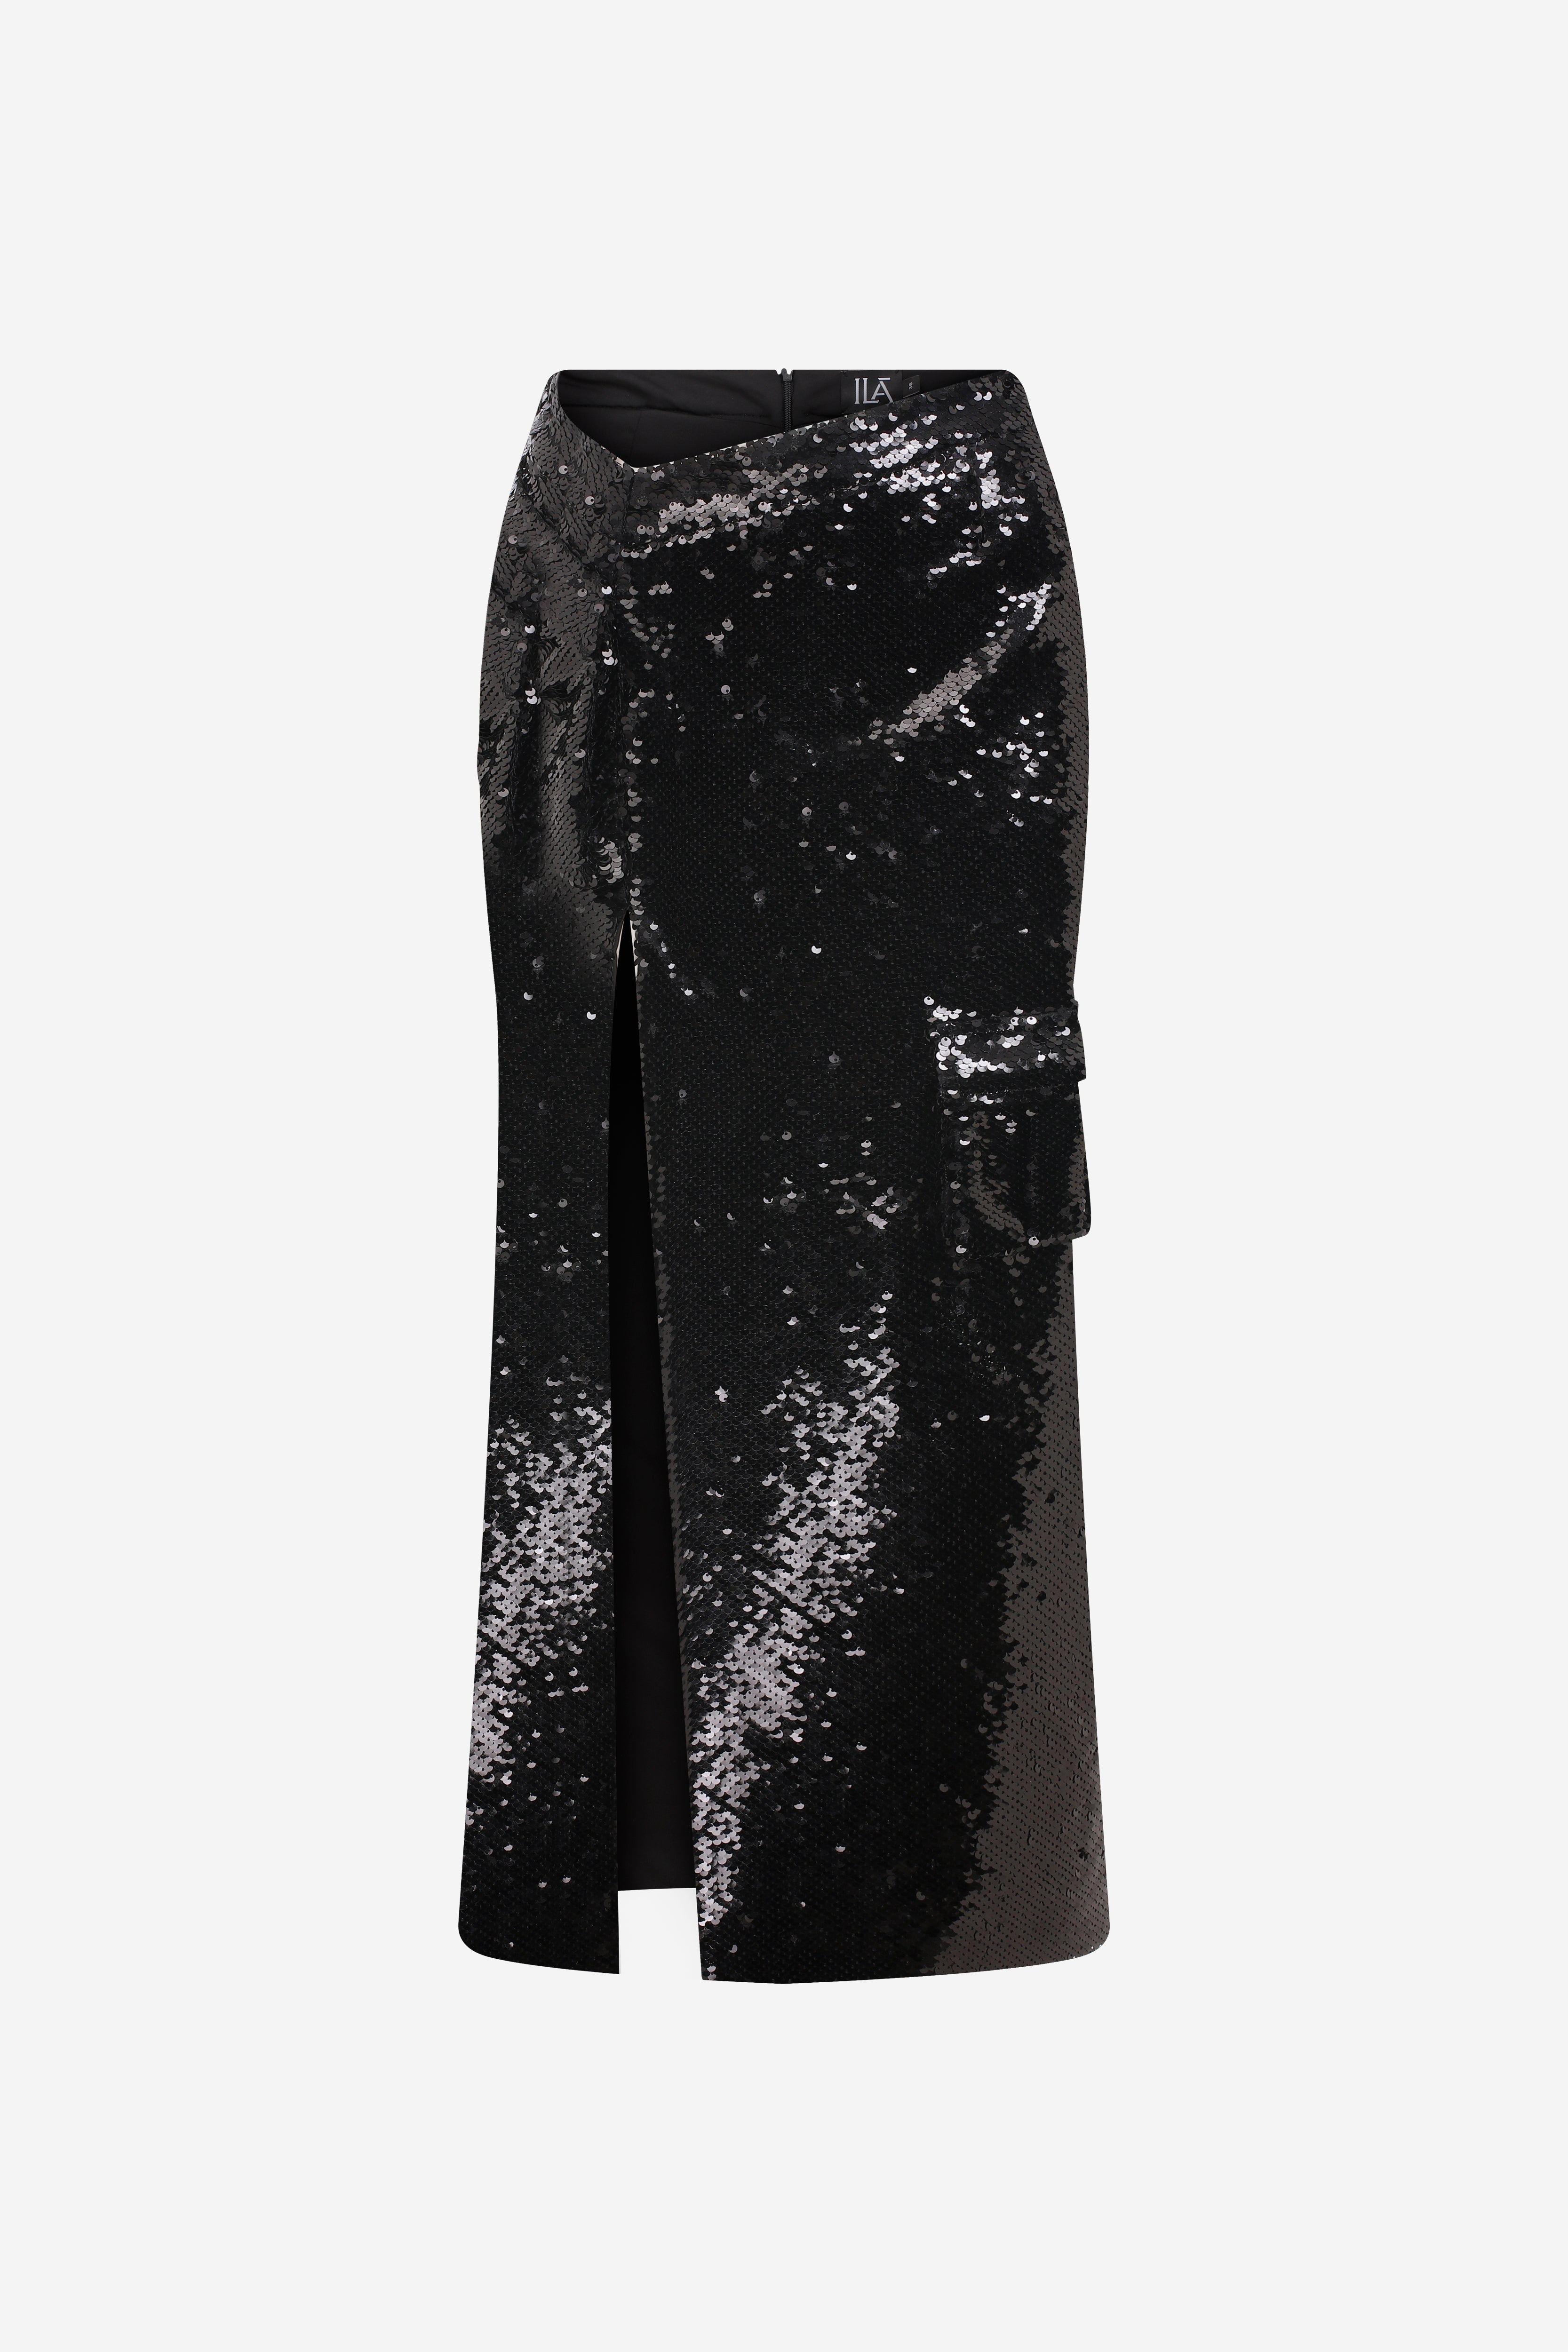 KELLY - SEQUIN MIDI SKIRT WITH CARGO POCKETS